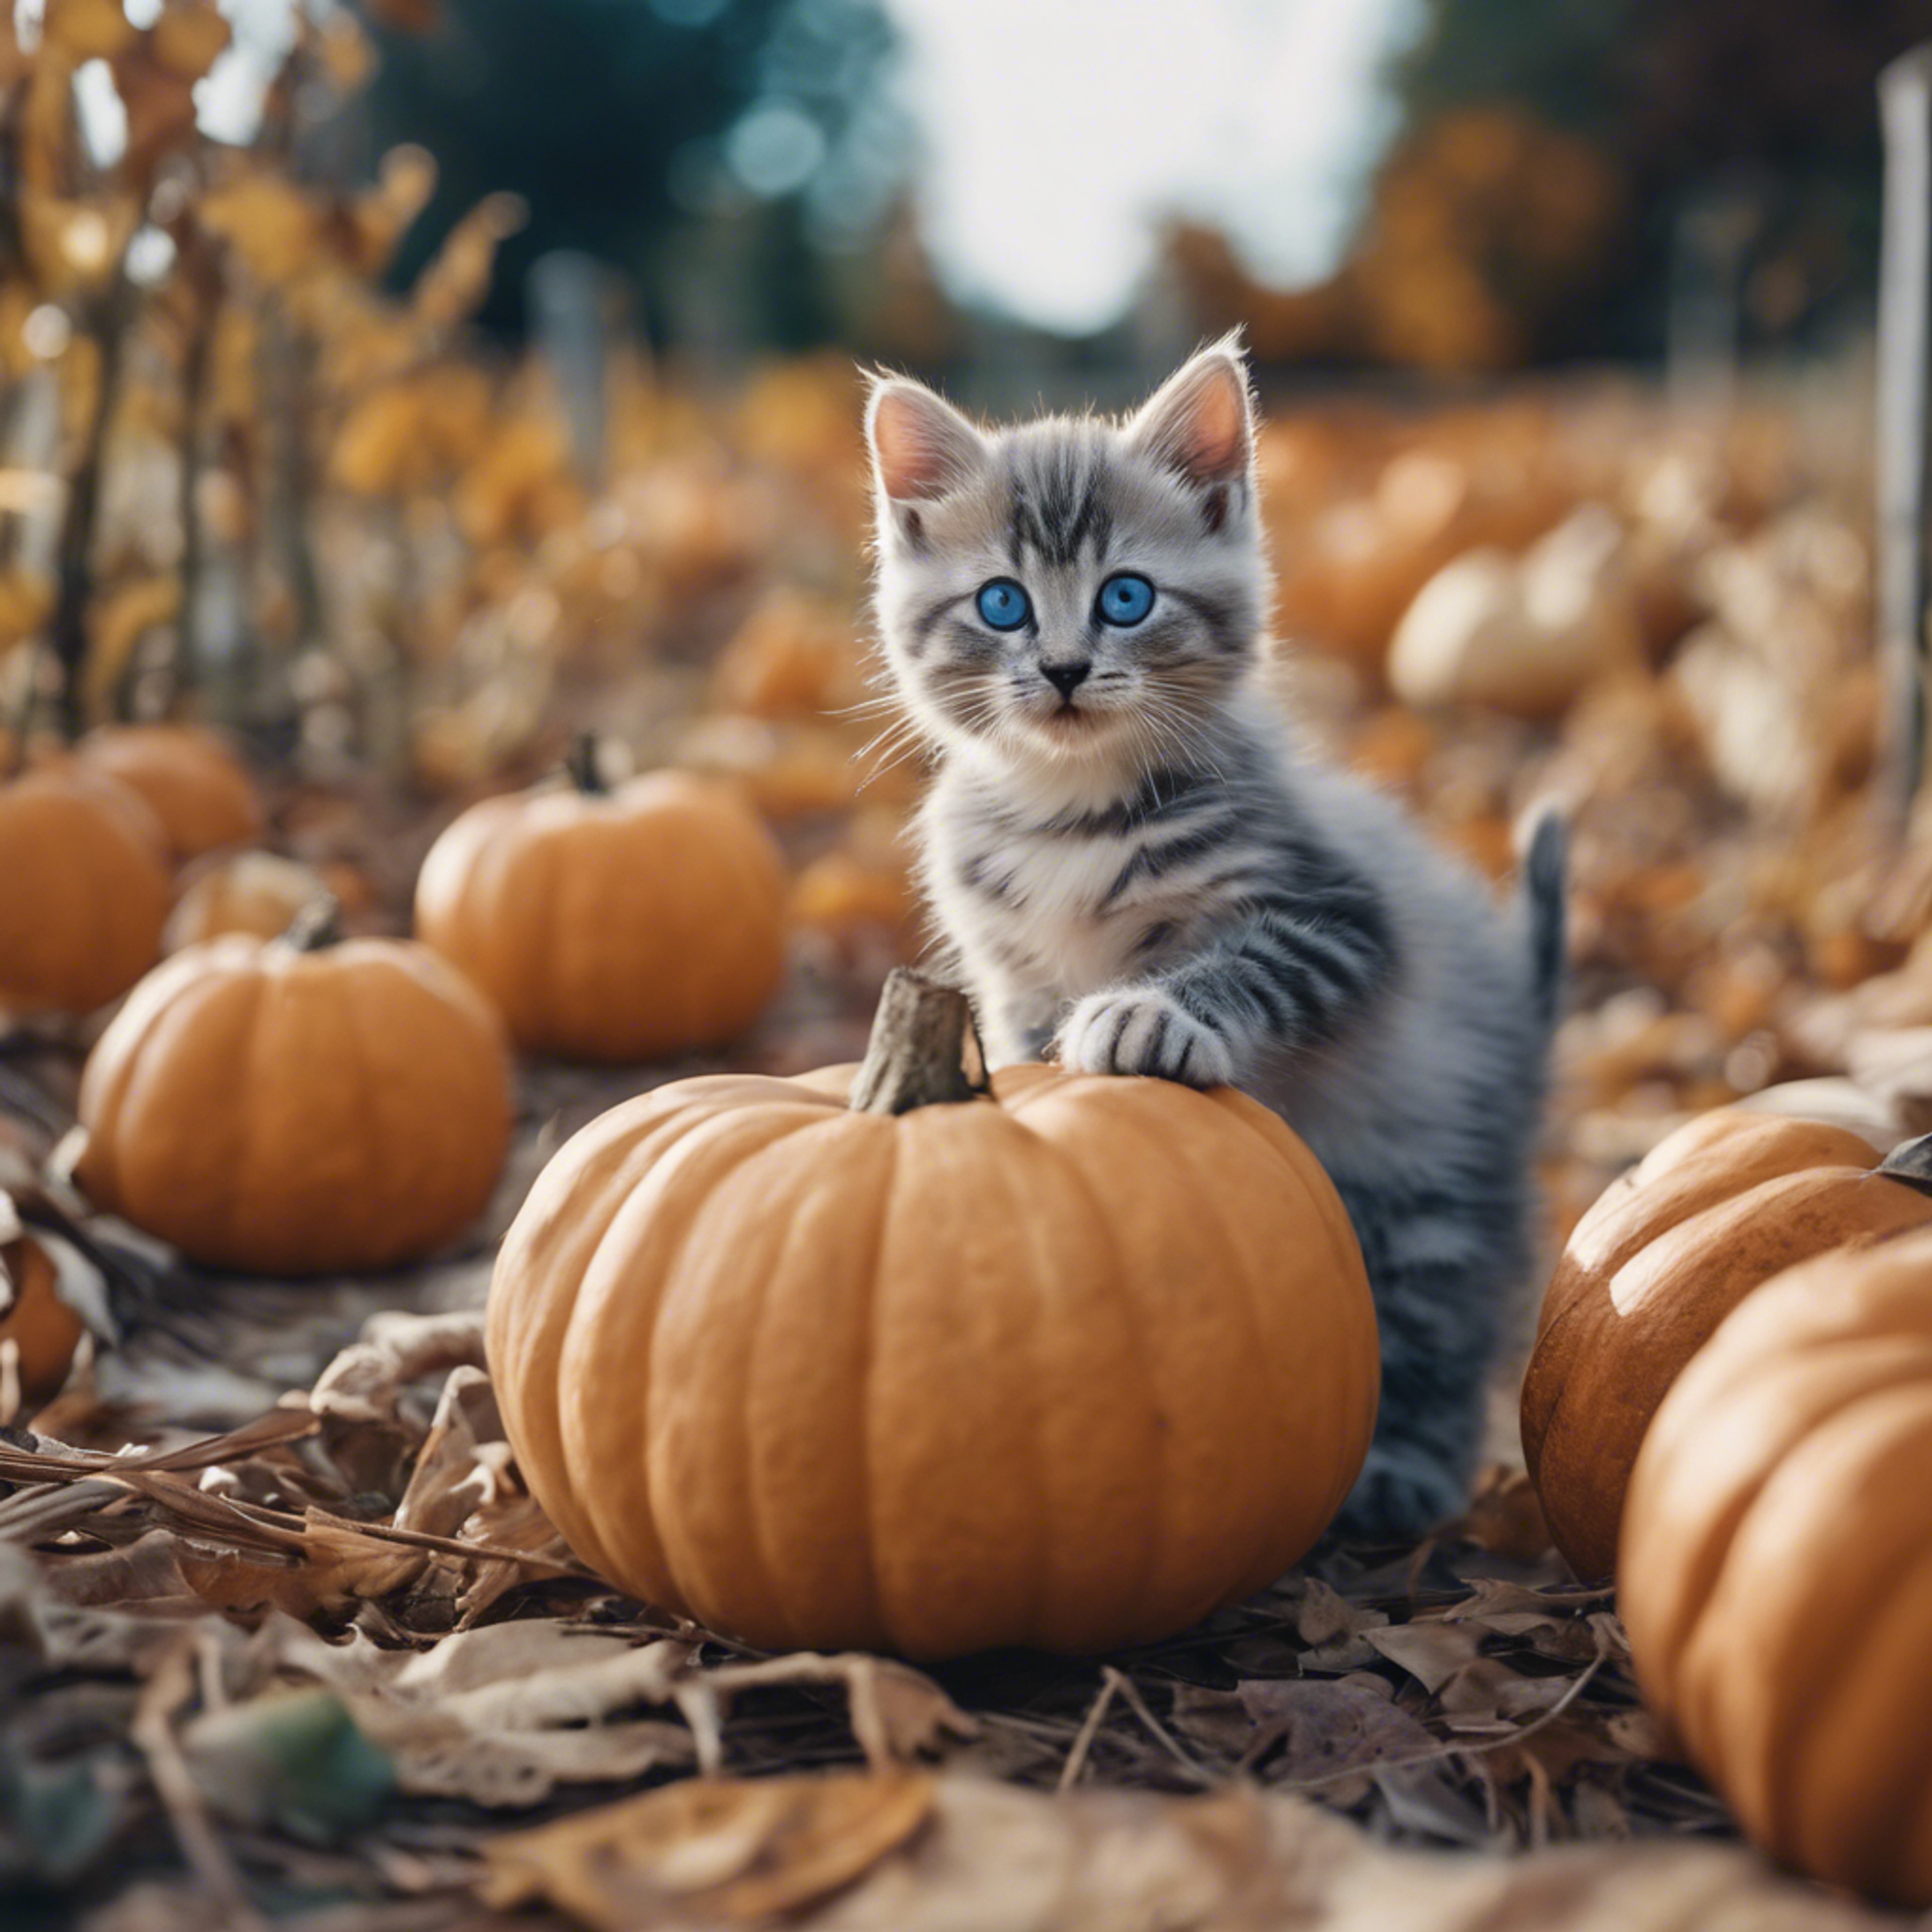 A small blue-eyed Cheetoh kitten exploring a pumpkin patch on an invitingly cool fall day. Tapéta[ee8fc80847a940e288a7]